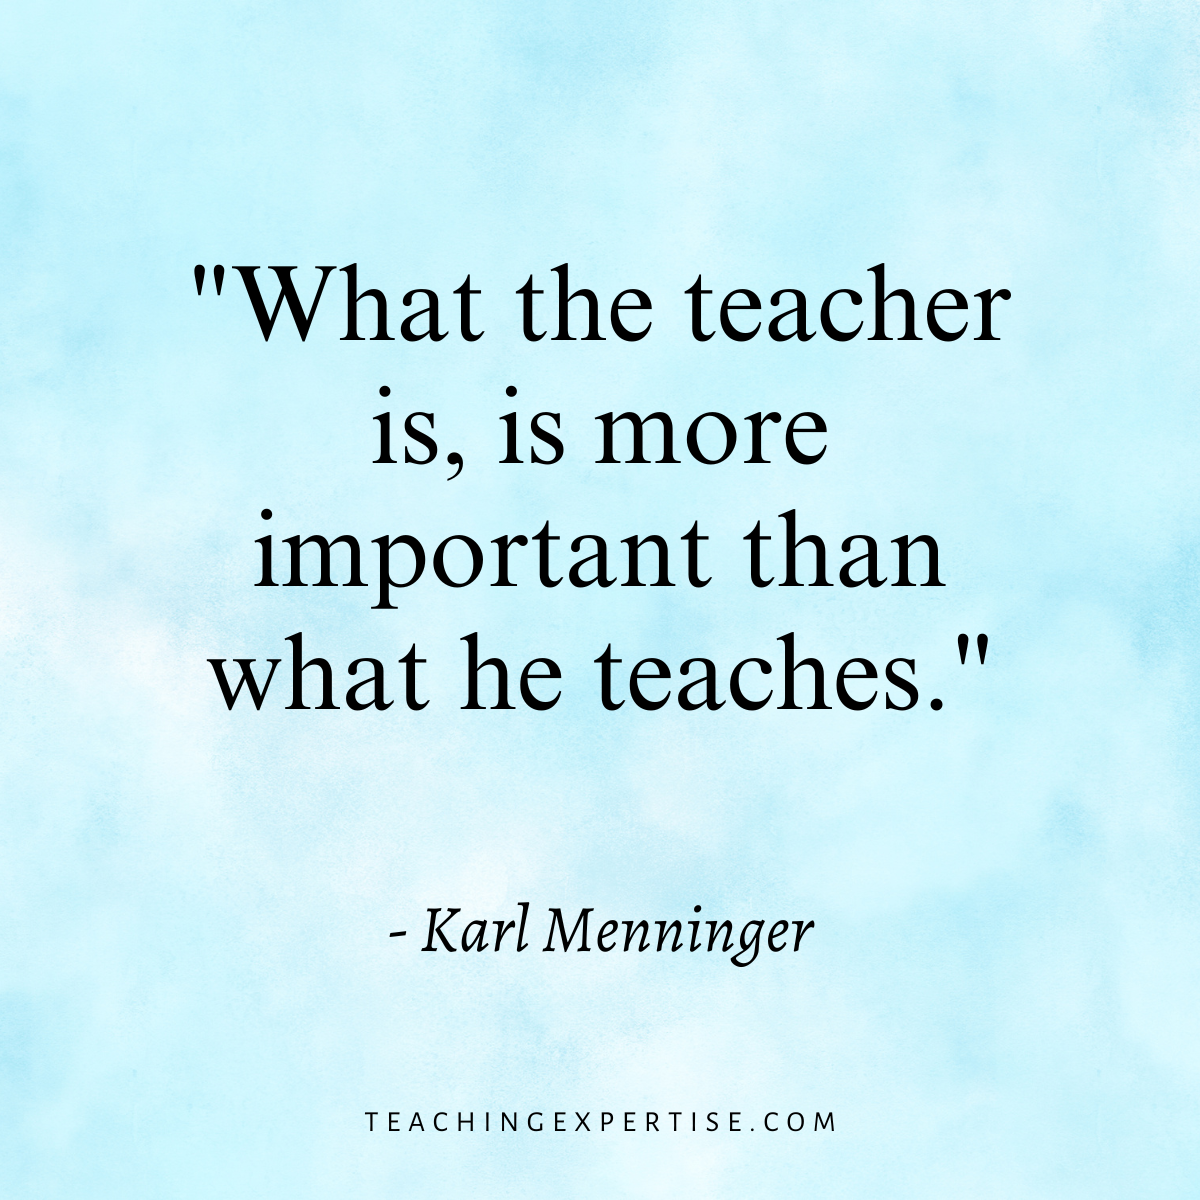 110 Best Inspirational Quotes for Teachers - Teaching Expertise